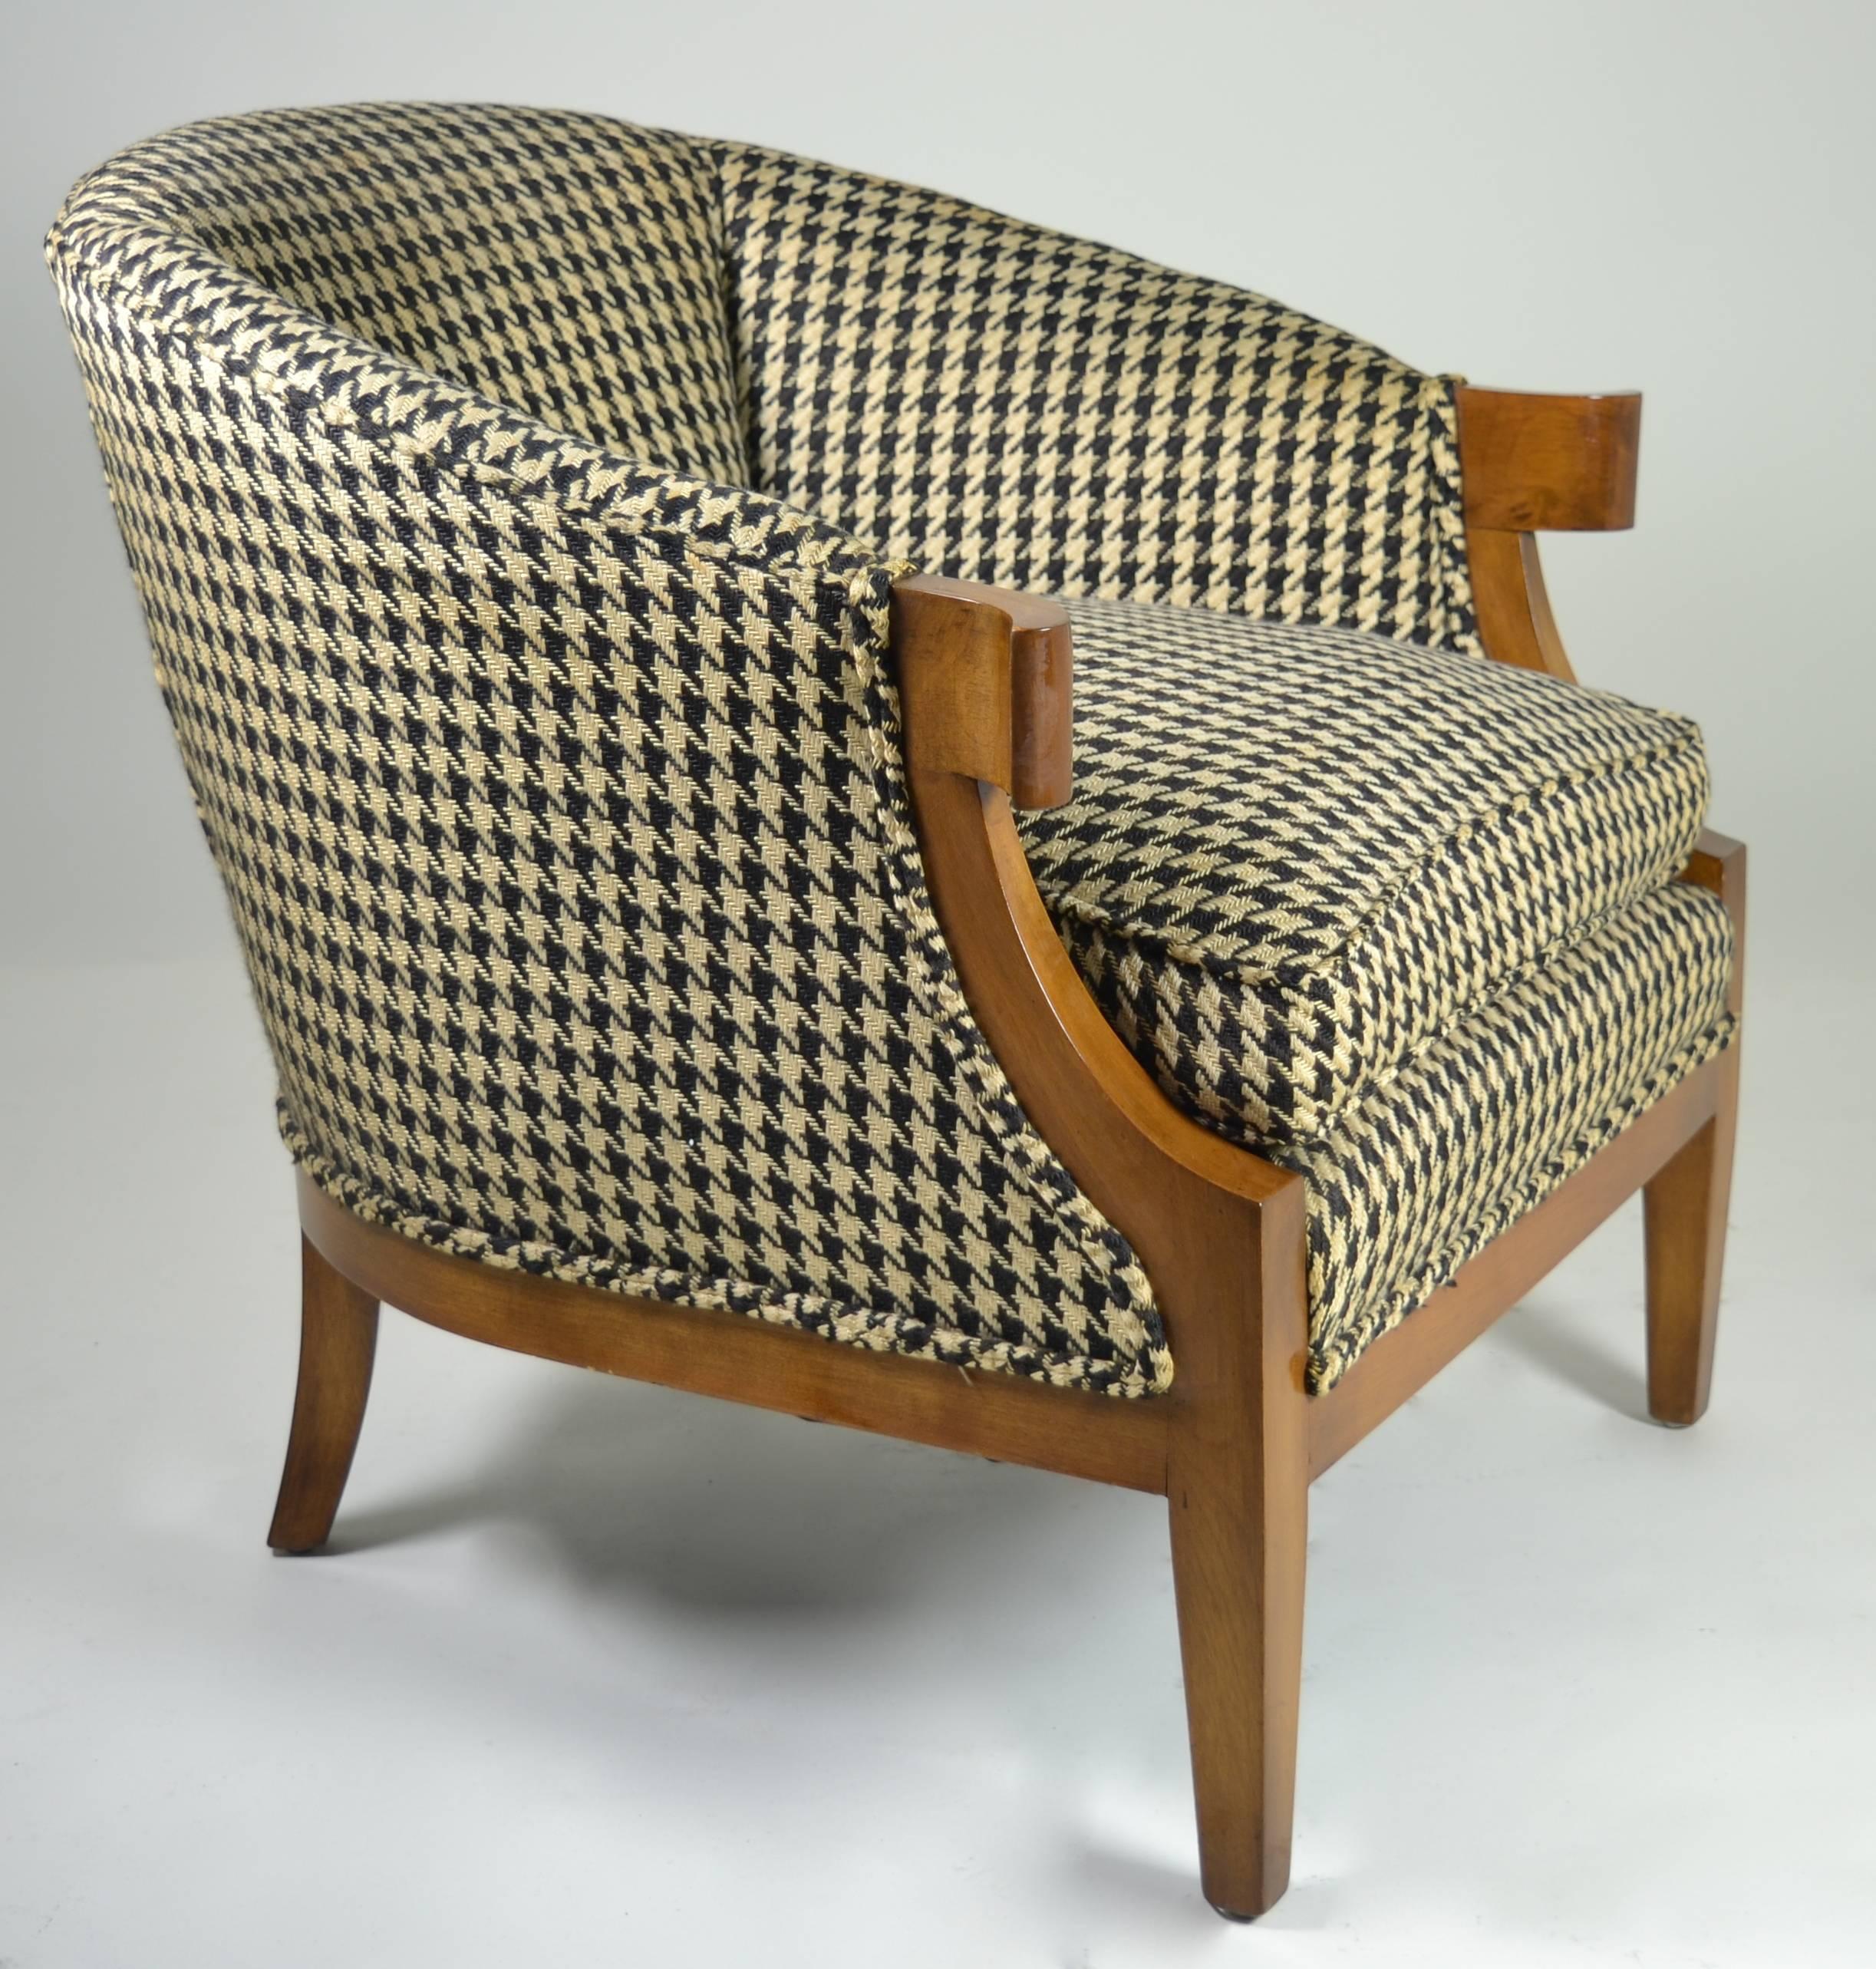 Handsome Club Chair, from the Continental Collection. This example covered in a great black and tan hounds tooth wool blend. Cushion is feather/fiber.